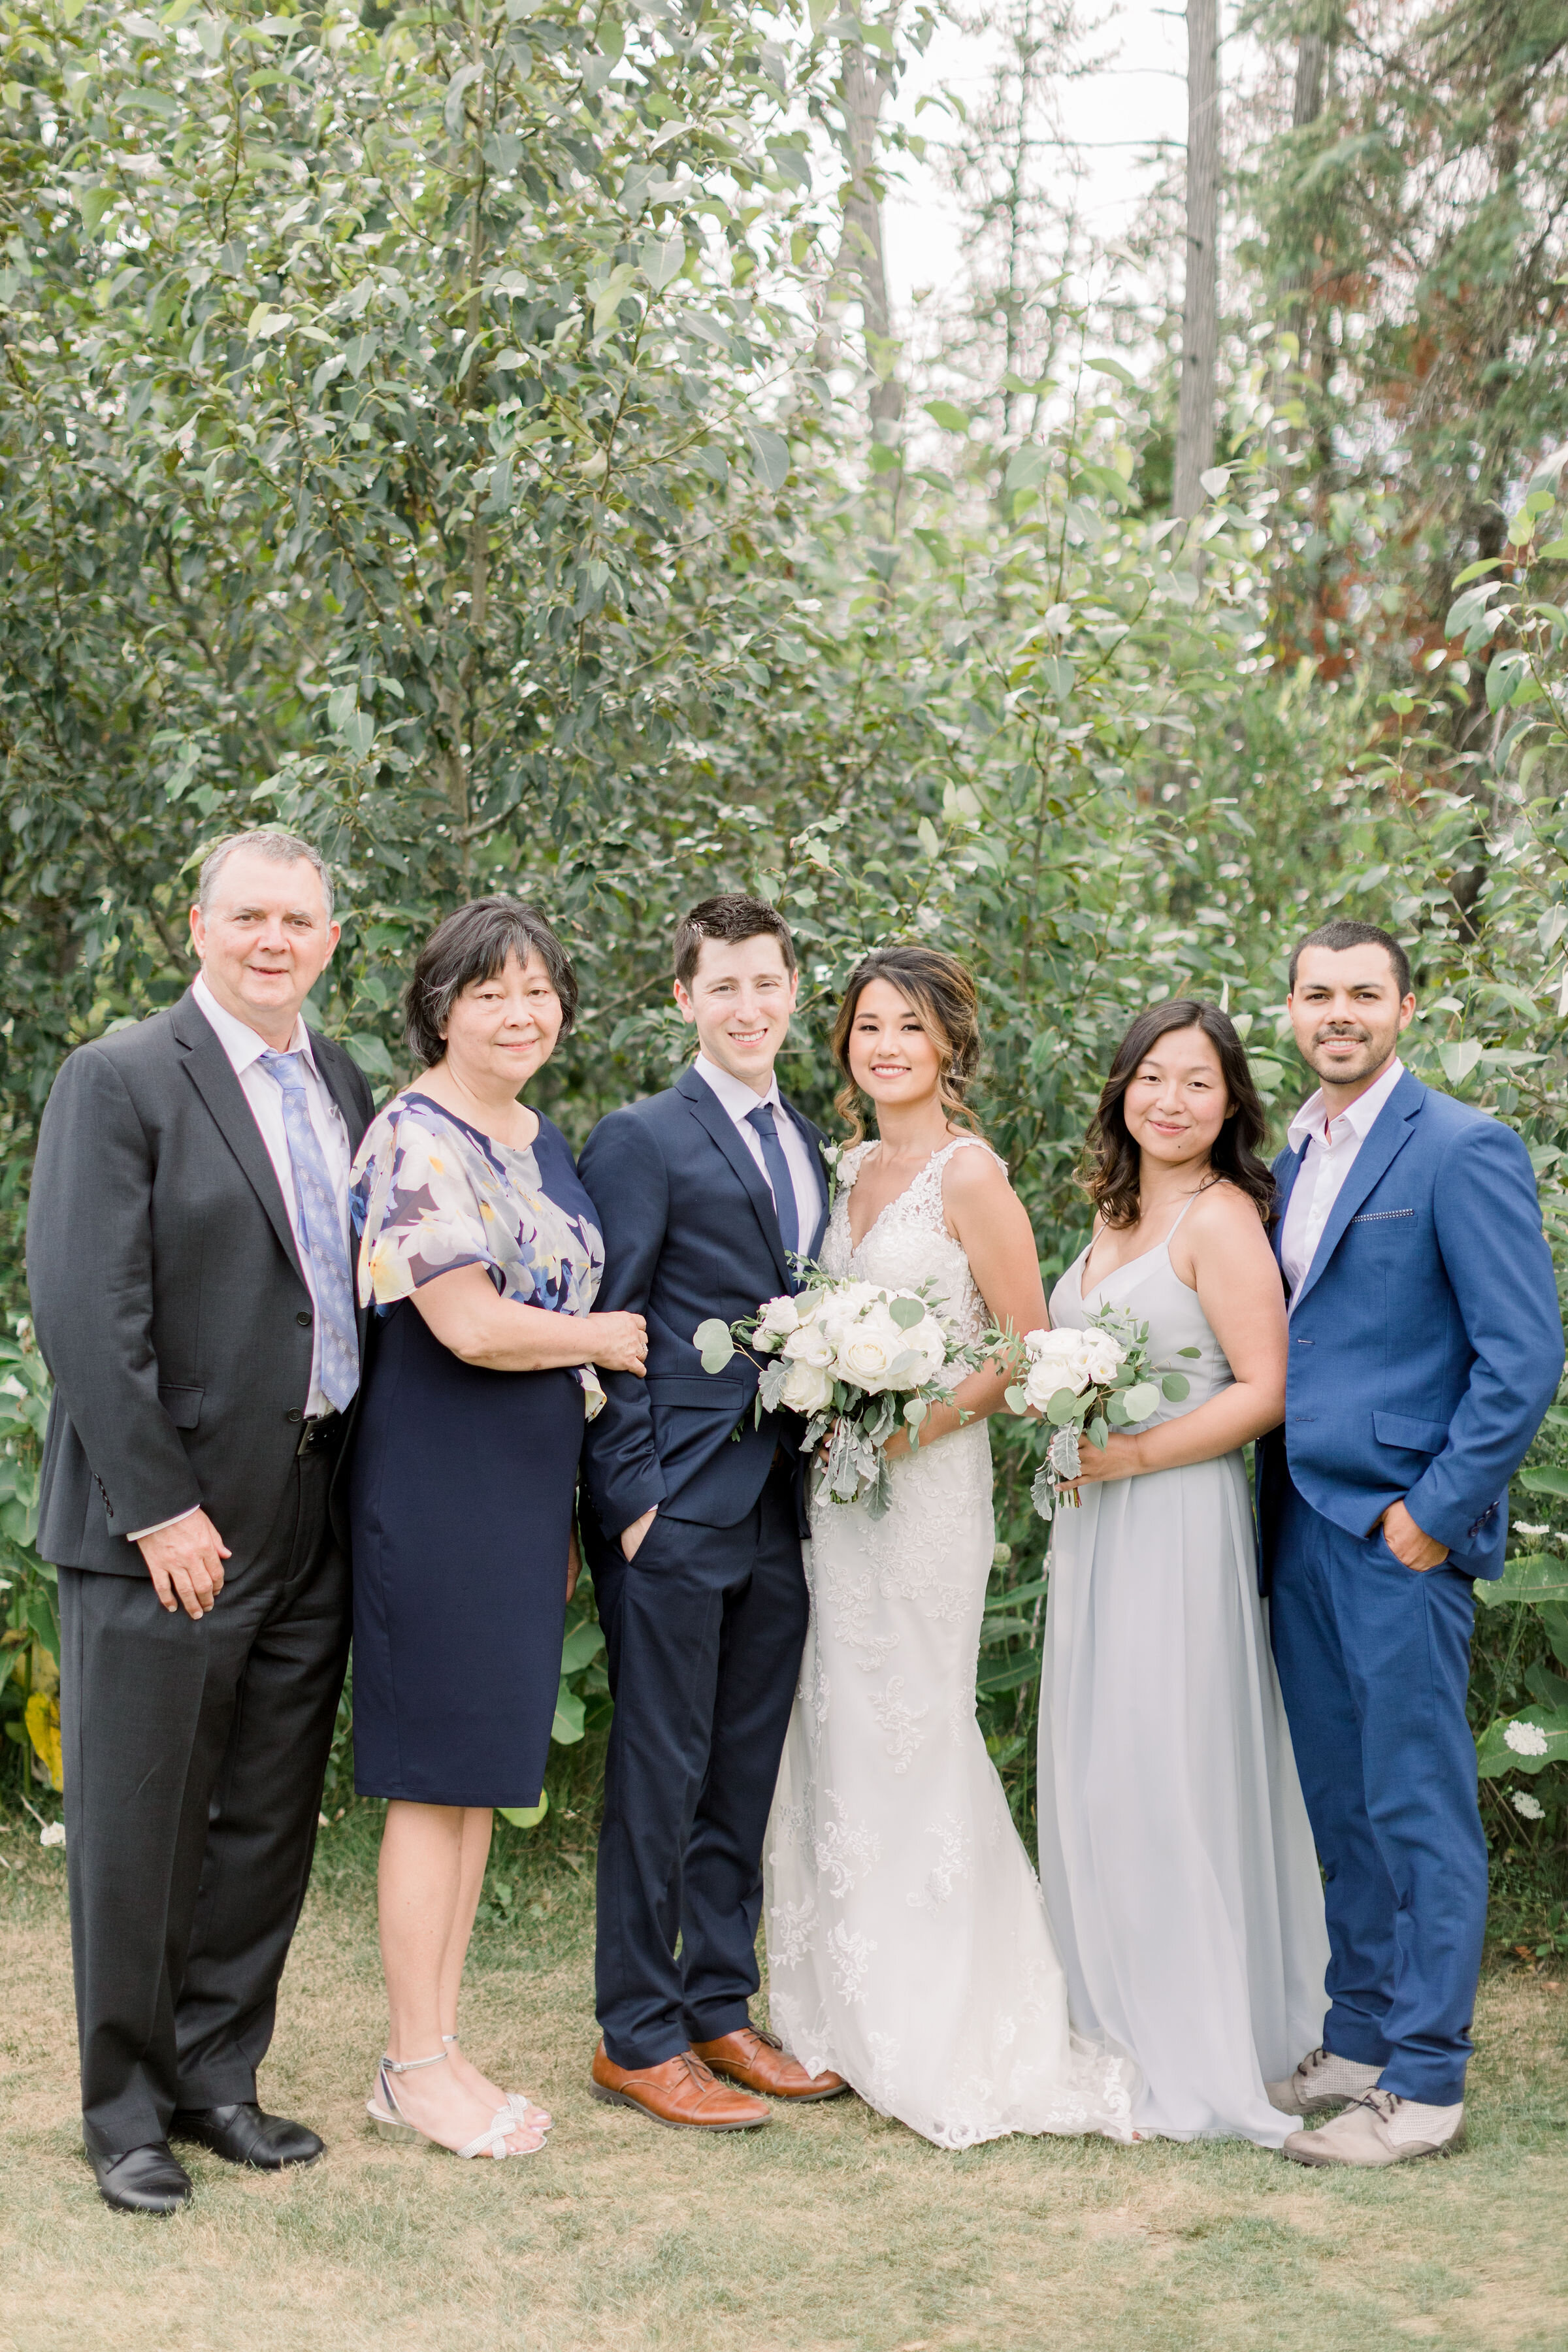  Beautiful wedding couple posing with family in an outdoor classic wedding in Ottawa, ON by Chelsea Mason Photography. how to pose large groups family pictures at weddings wedding party outfits mother of the bride outfit blue and silver wedding color